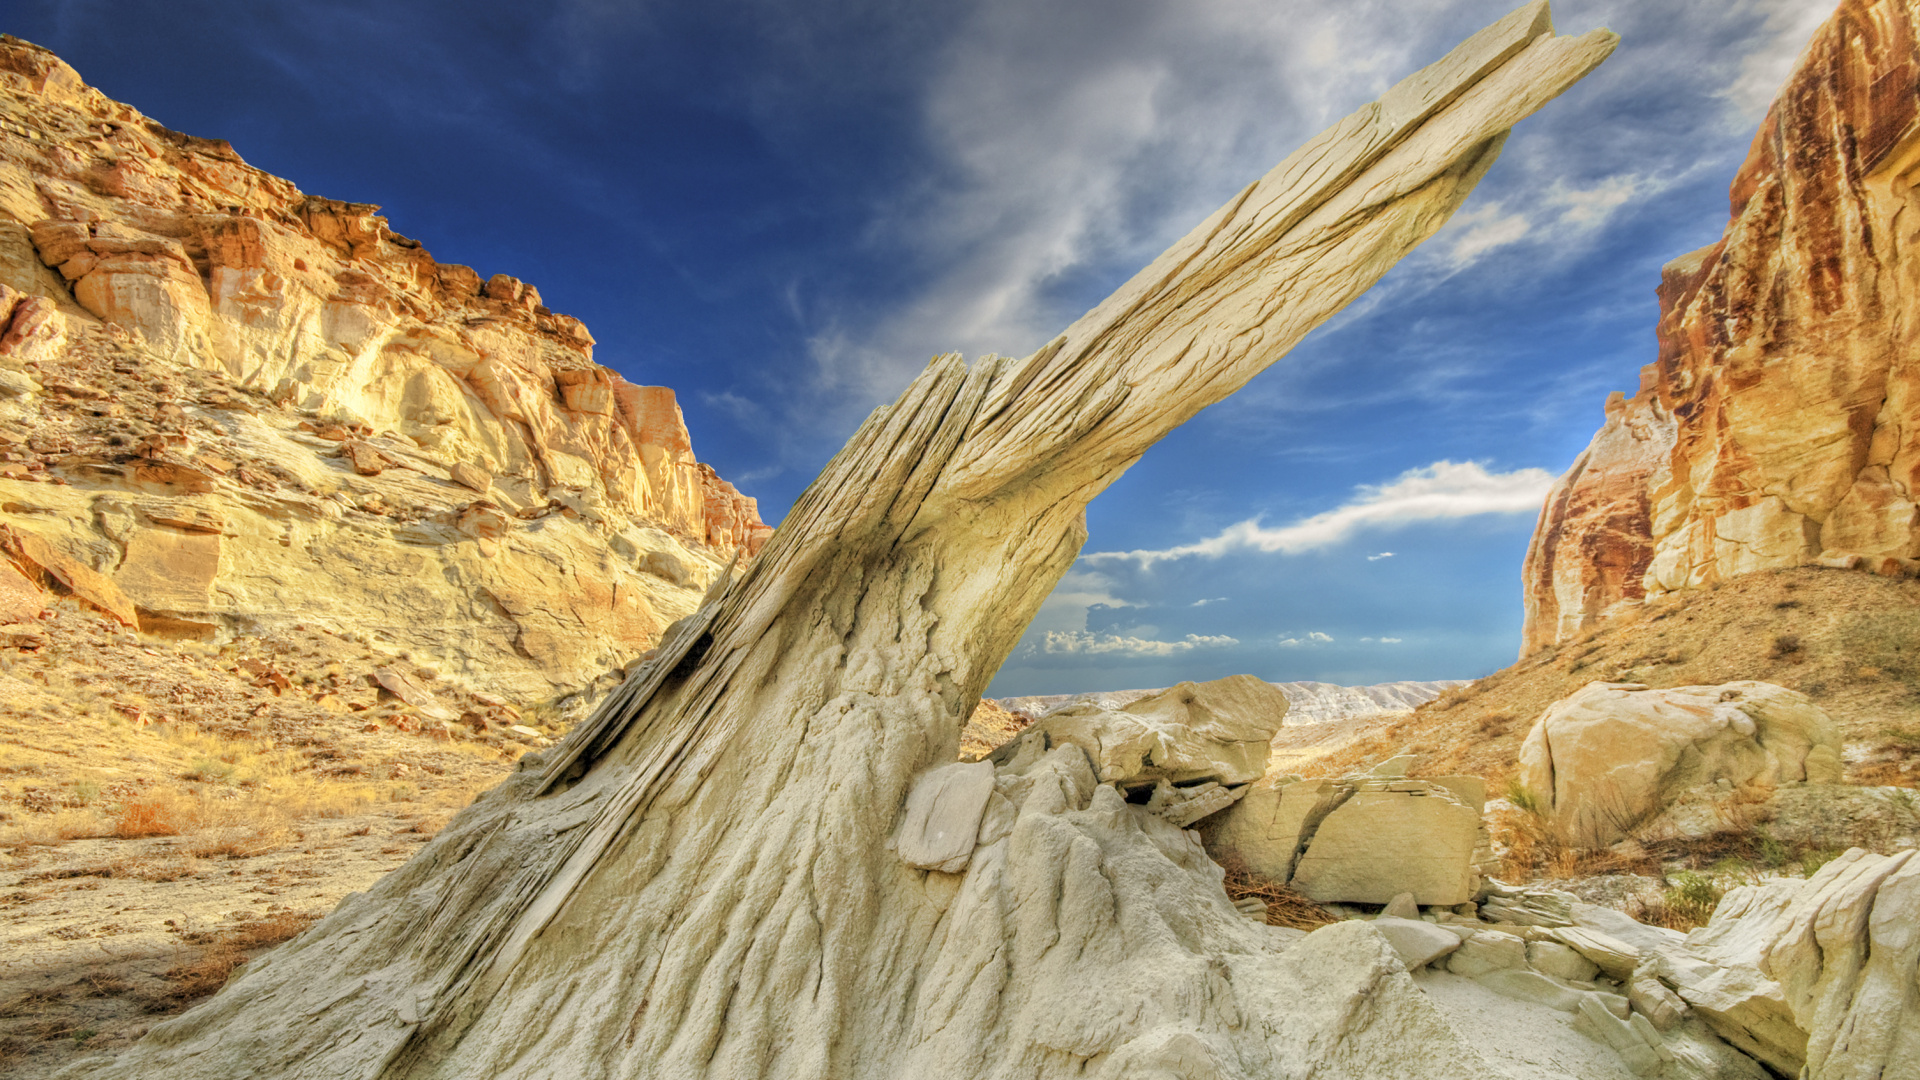 Brown Rock Formation Under Blue Sky and White Clouds During Daytime. Wallpaper in 1920x1080 Resolution